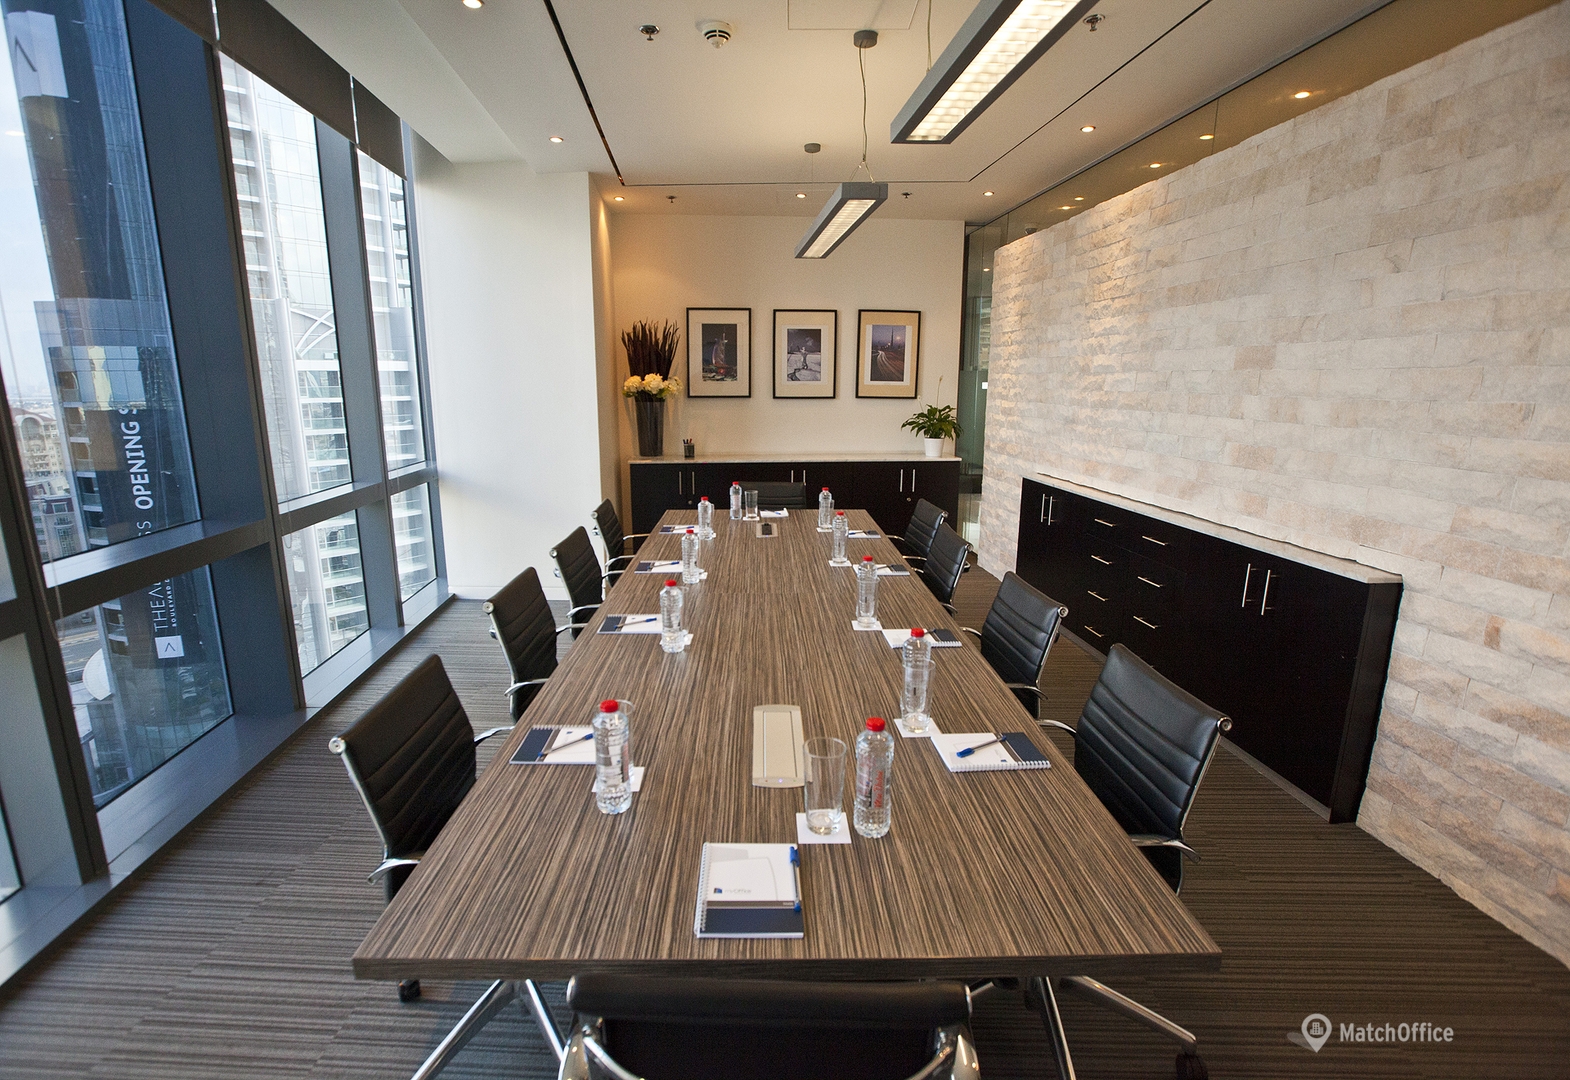 Rent a meeting room in Dubai | MatchOffice